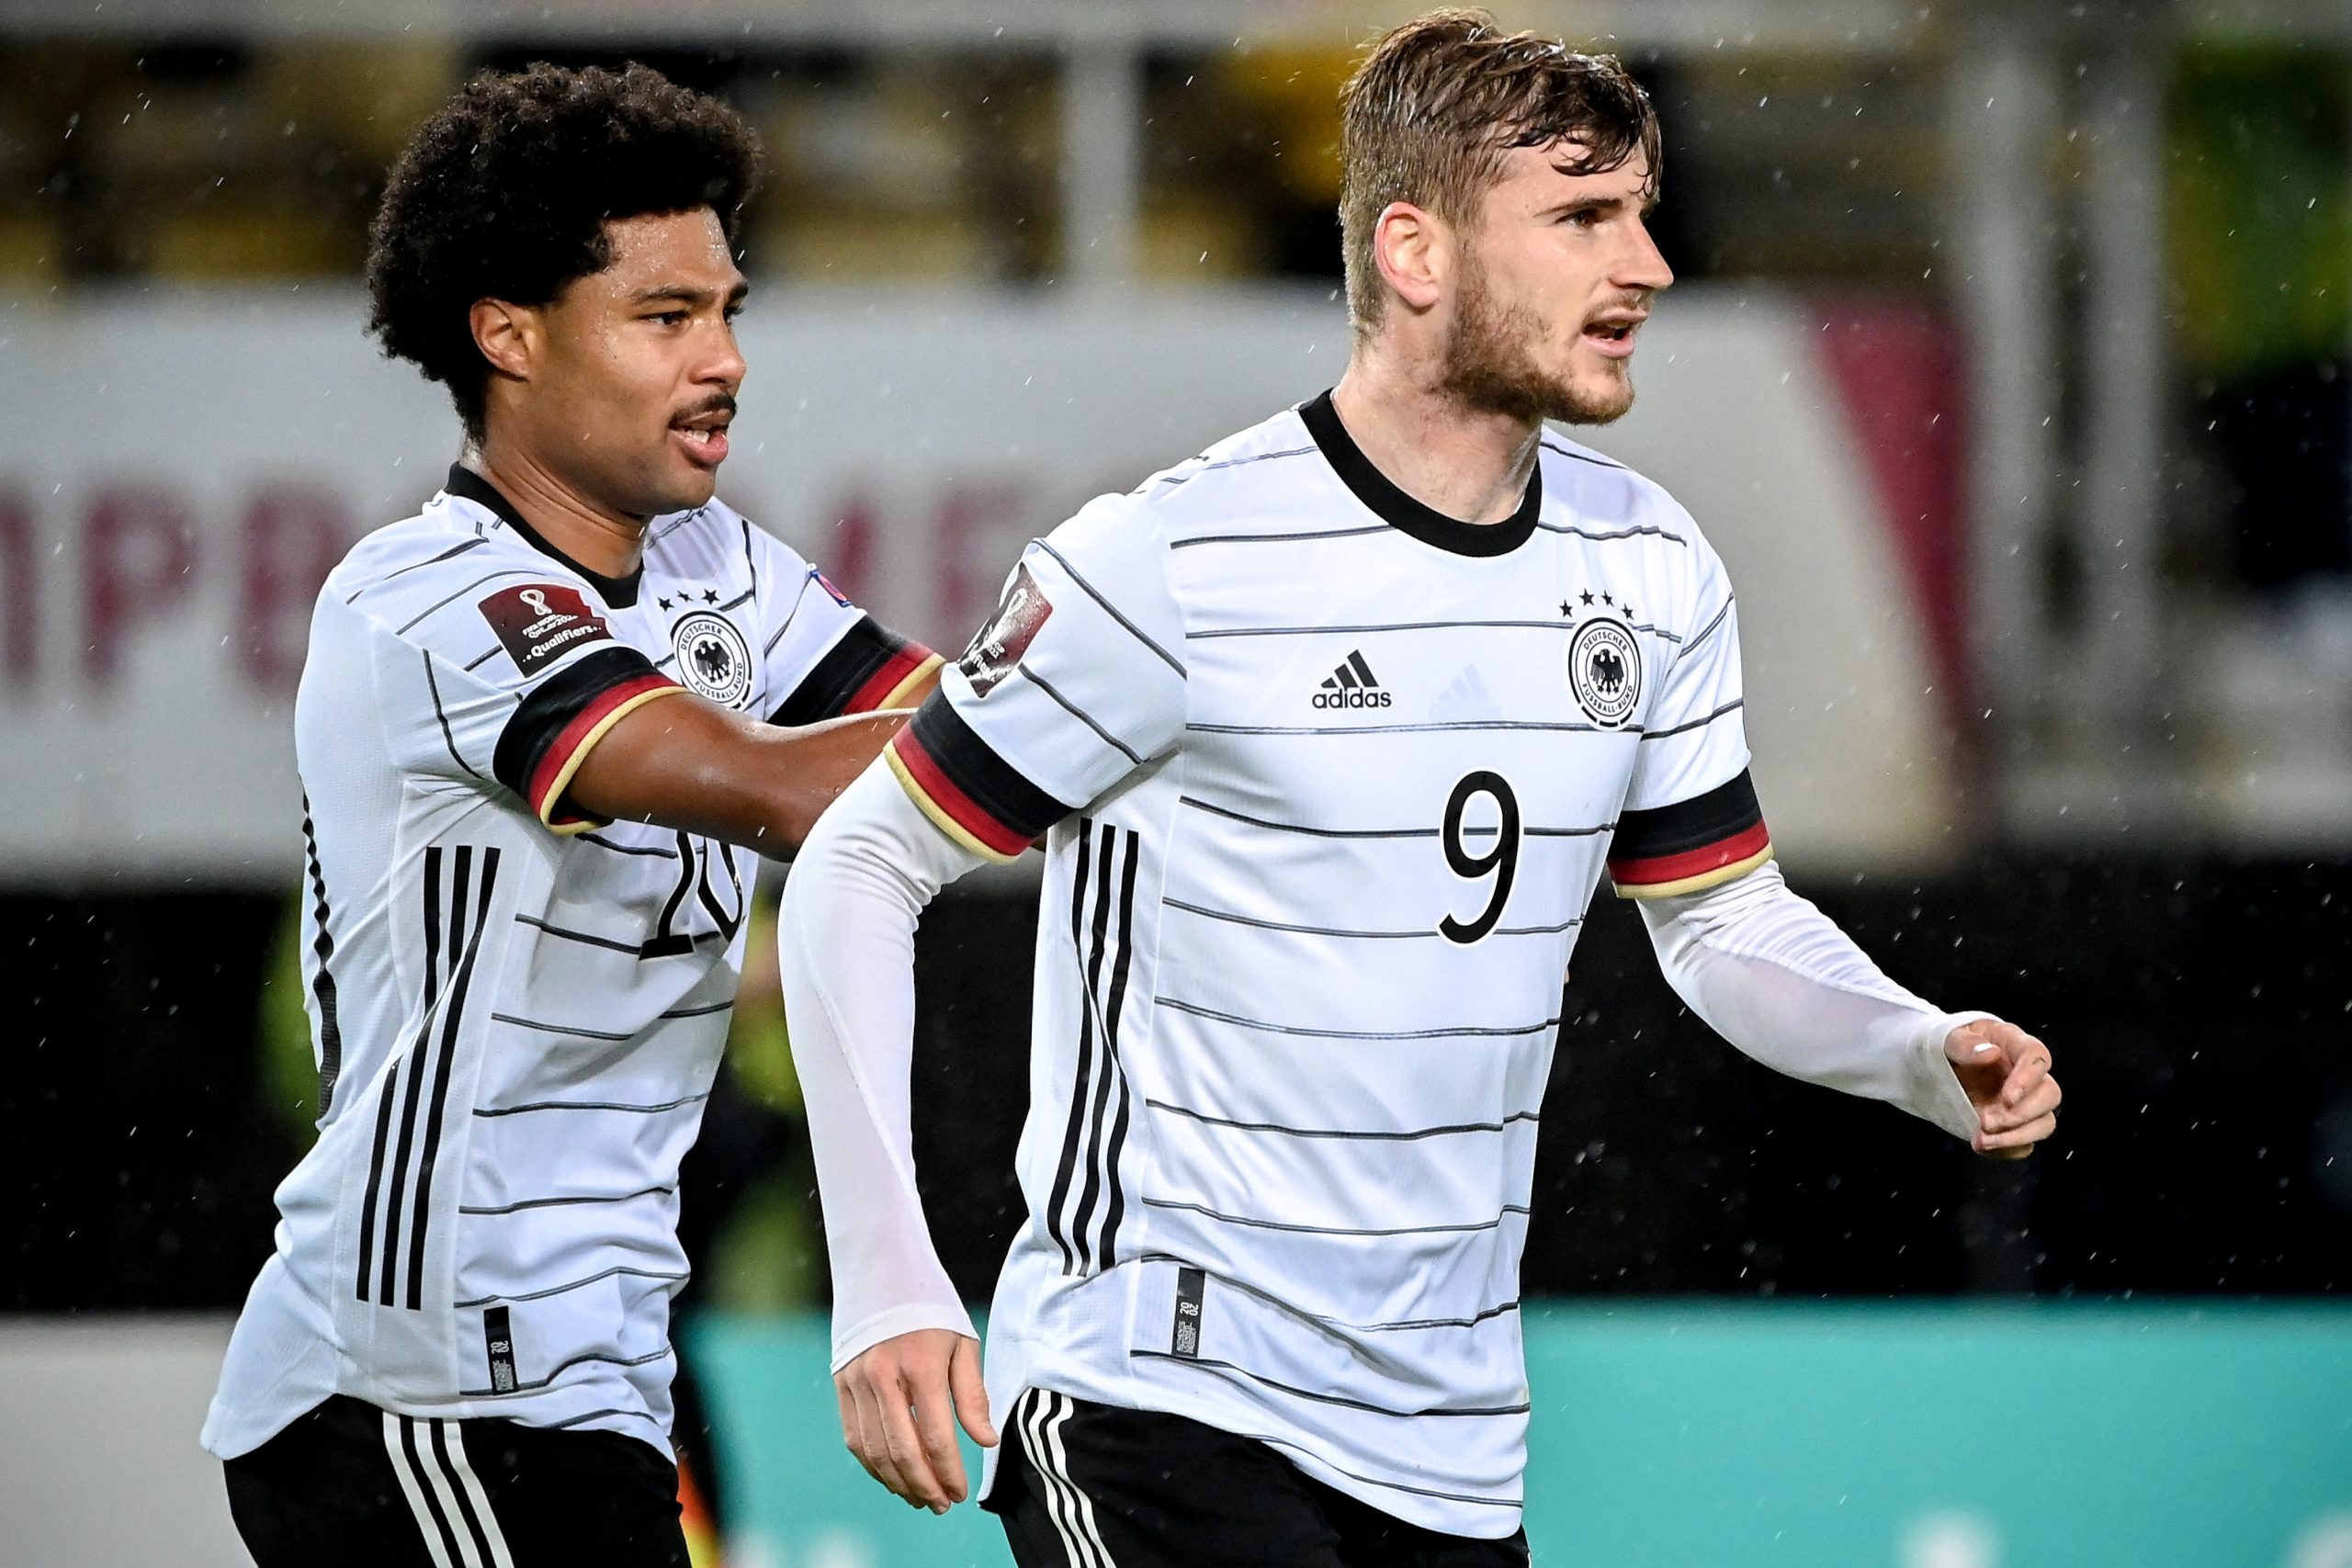 epa09519246 Germany's Timo Werner (R) celebrates with his teammate Serge Gnabry (L) after scoring the 3-0 lead during the FIFA World Cup Qatar 2022 qualifying Group J soccer match between North Macedonia and Germany in Skopje, Republic of North Macedonia, 11 October 2021.  EPA/GEORGI LICOVSKI